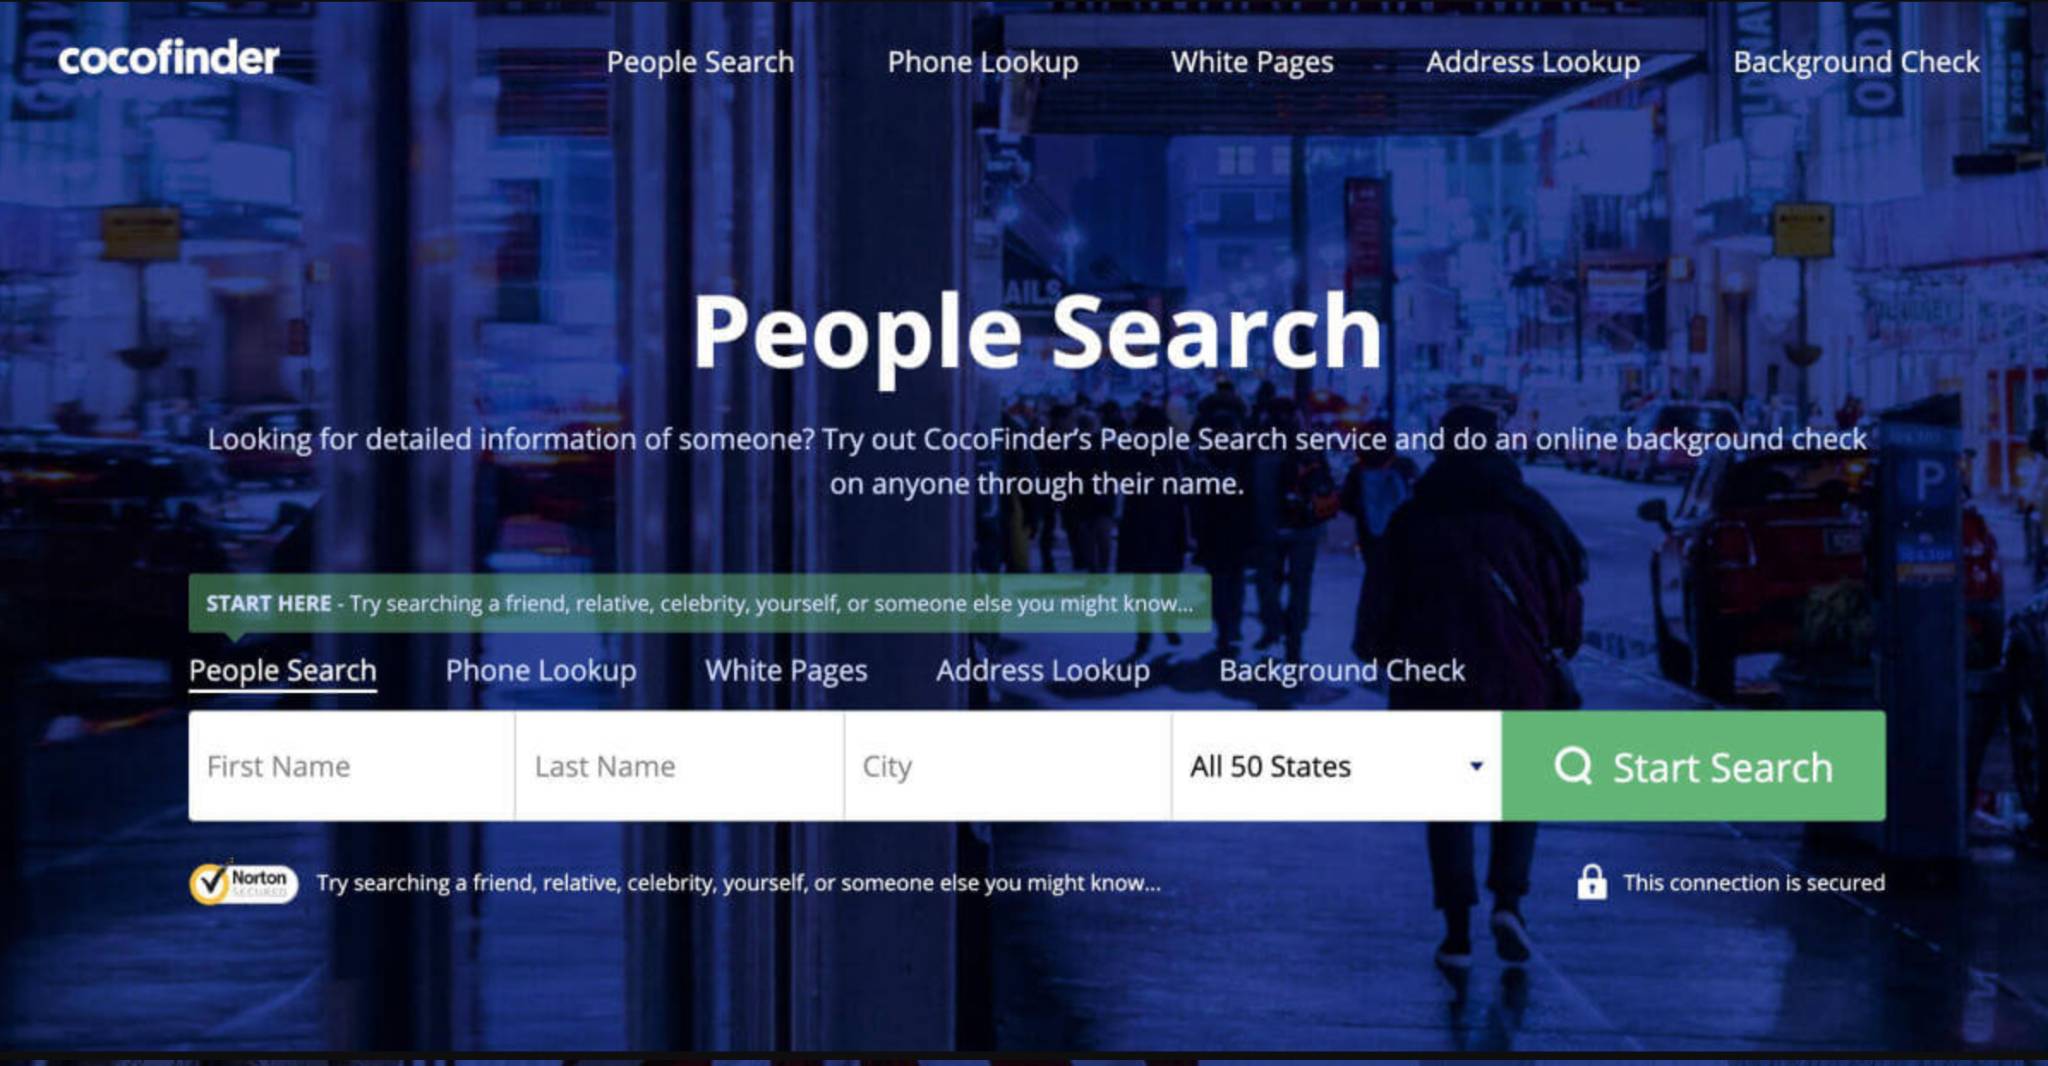 How to Use CocoFinders People Search Tool